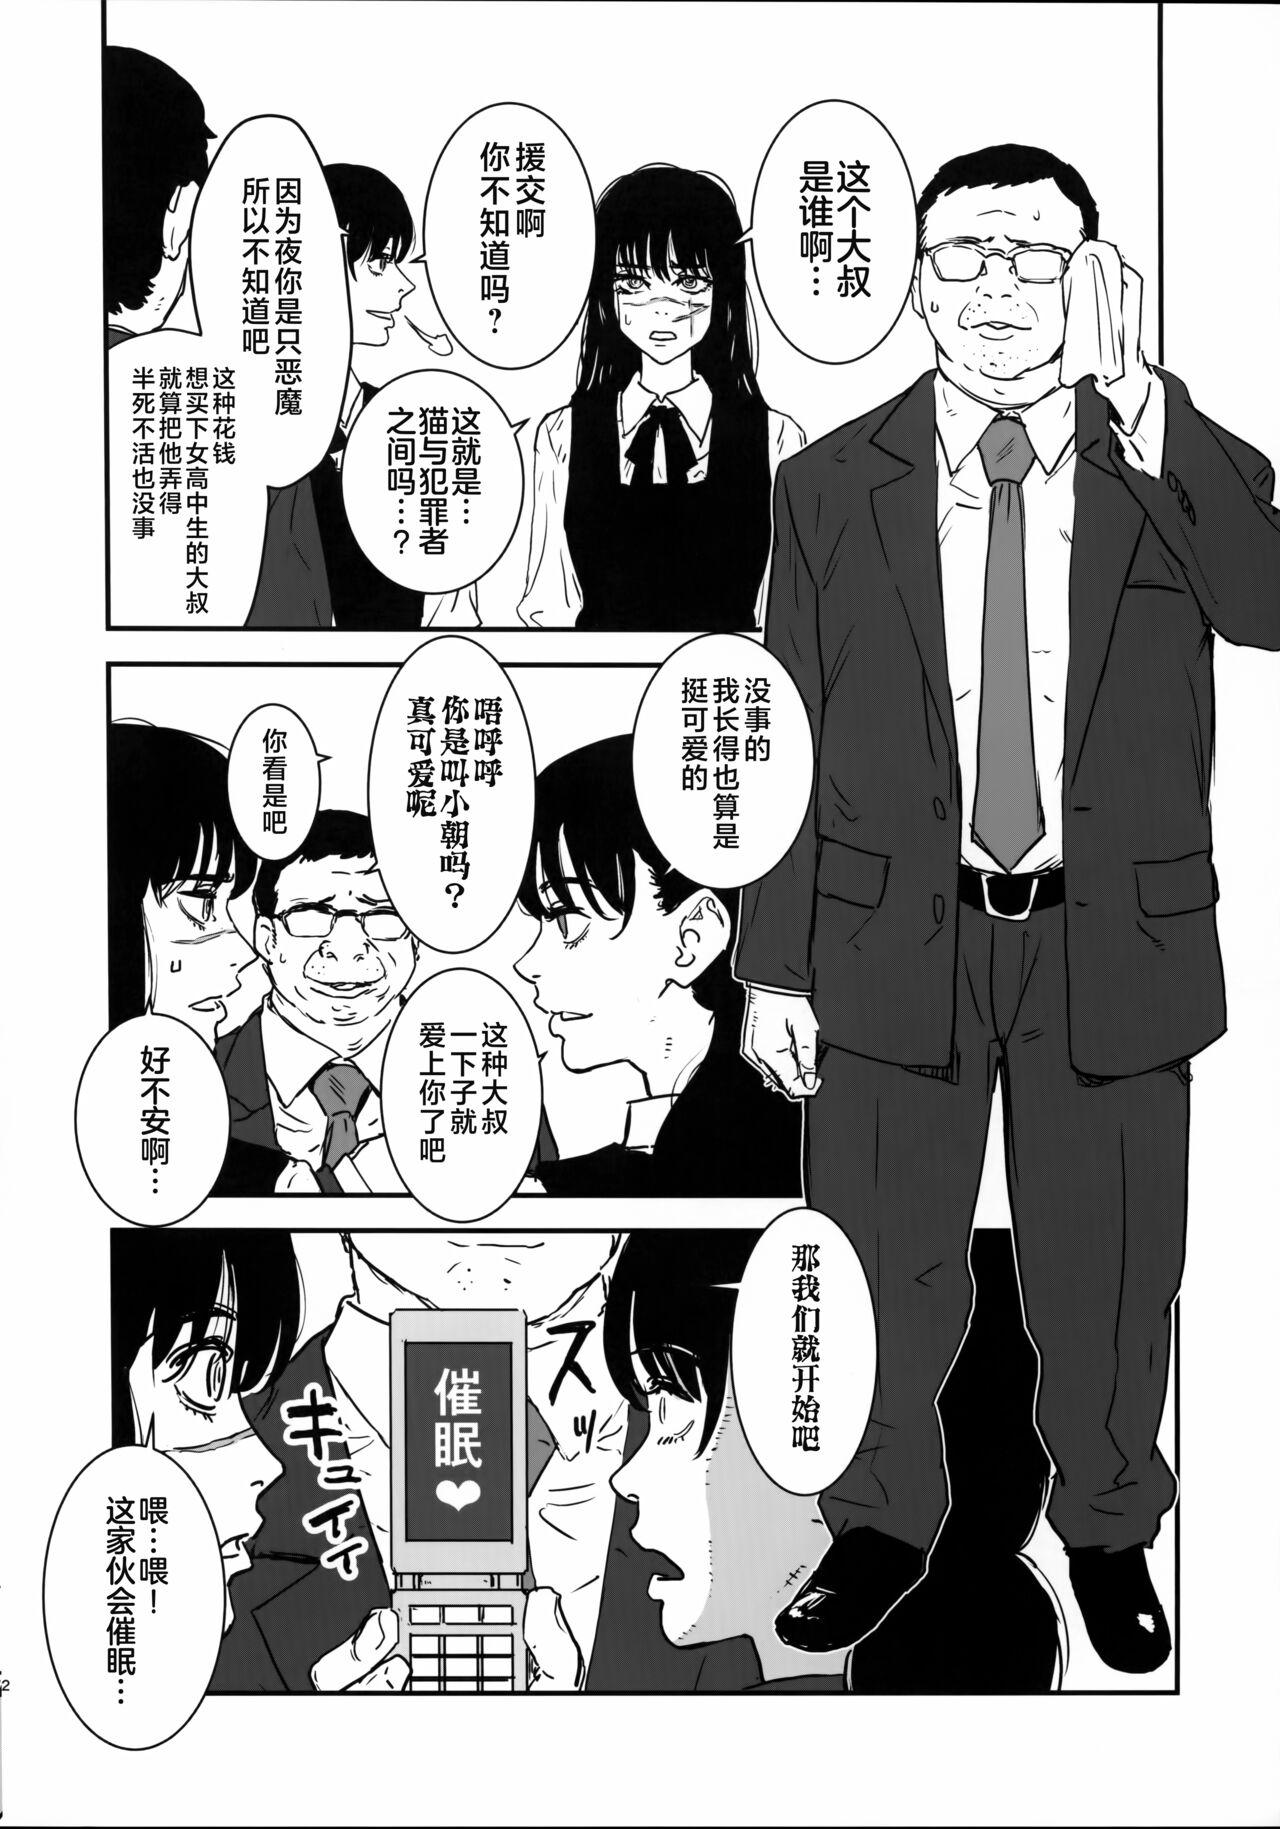 Culazo 猫と犯罪者の間 - Chainsaw man Wives - Page 2